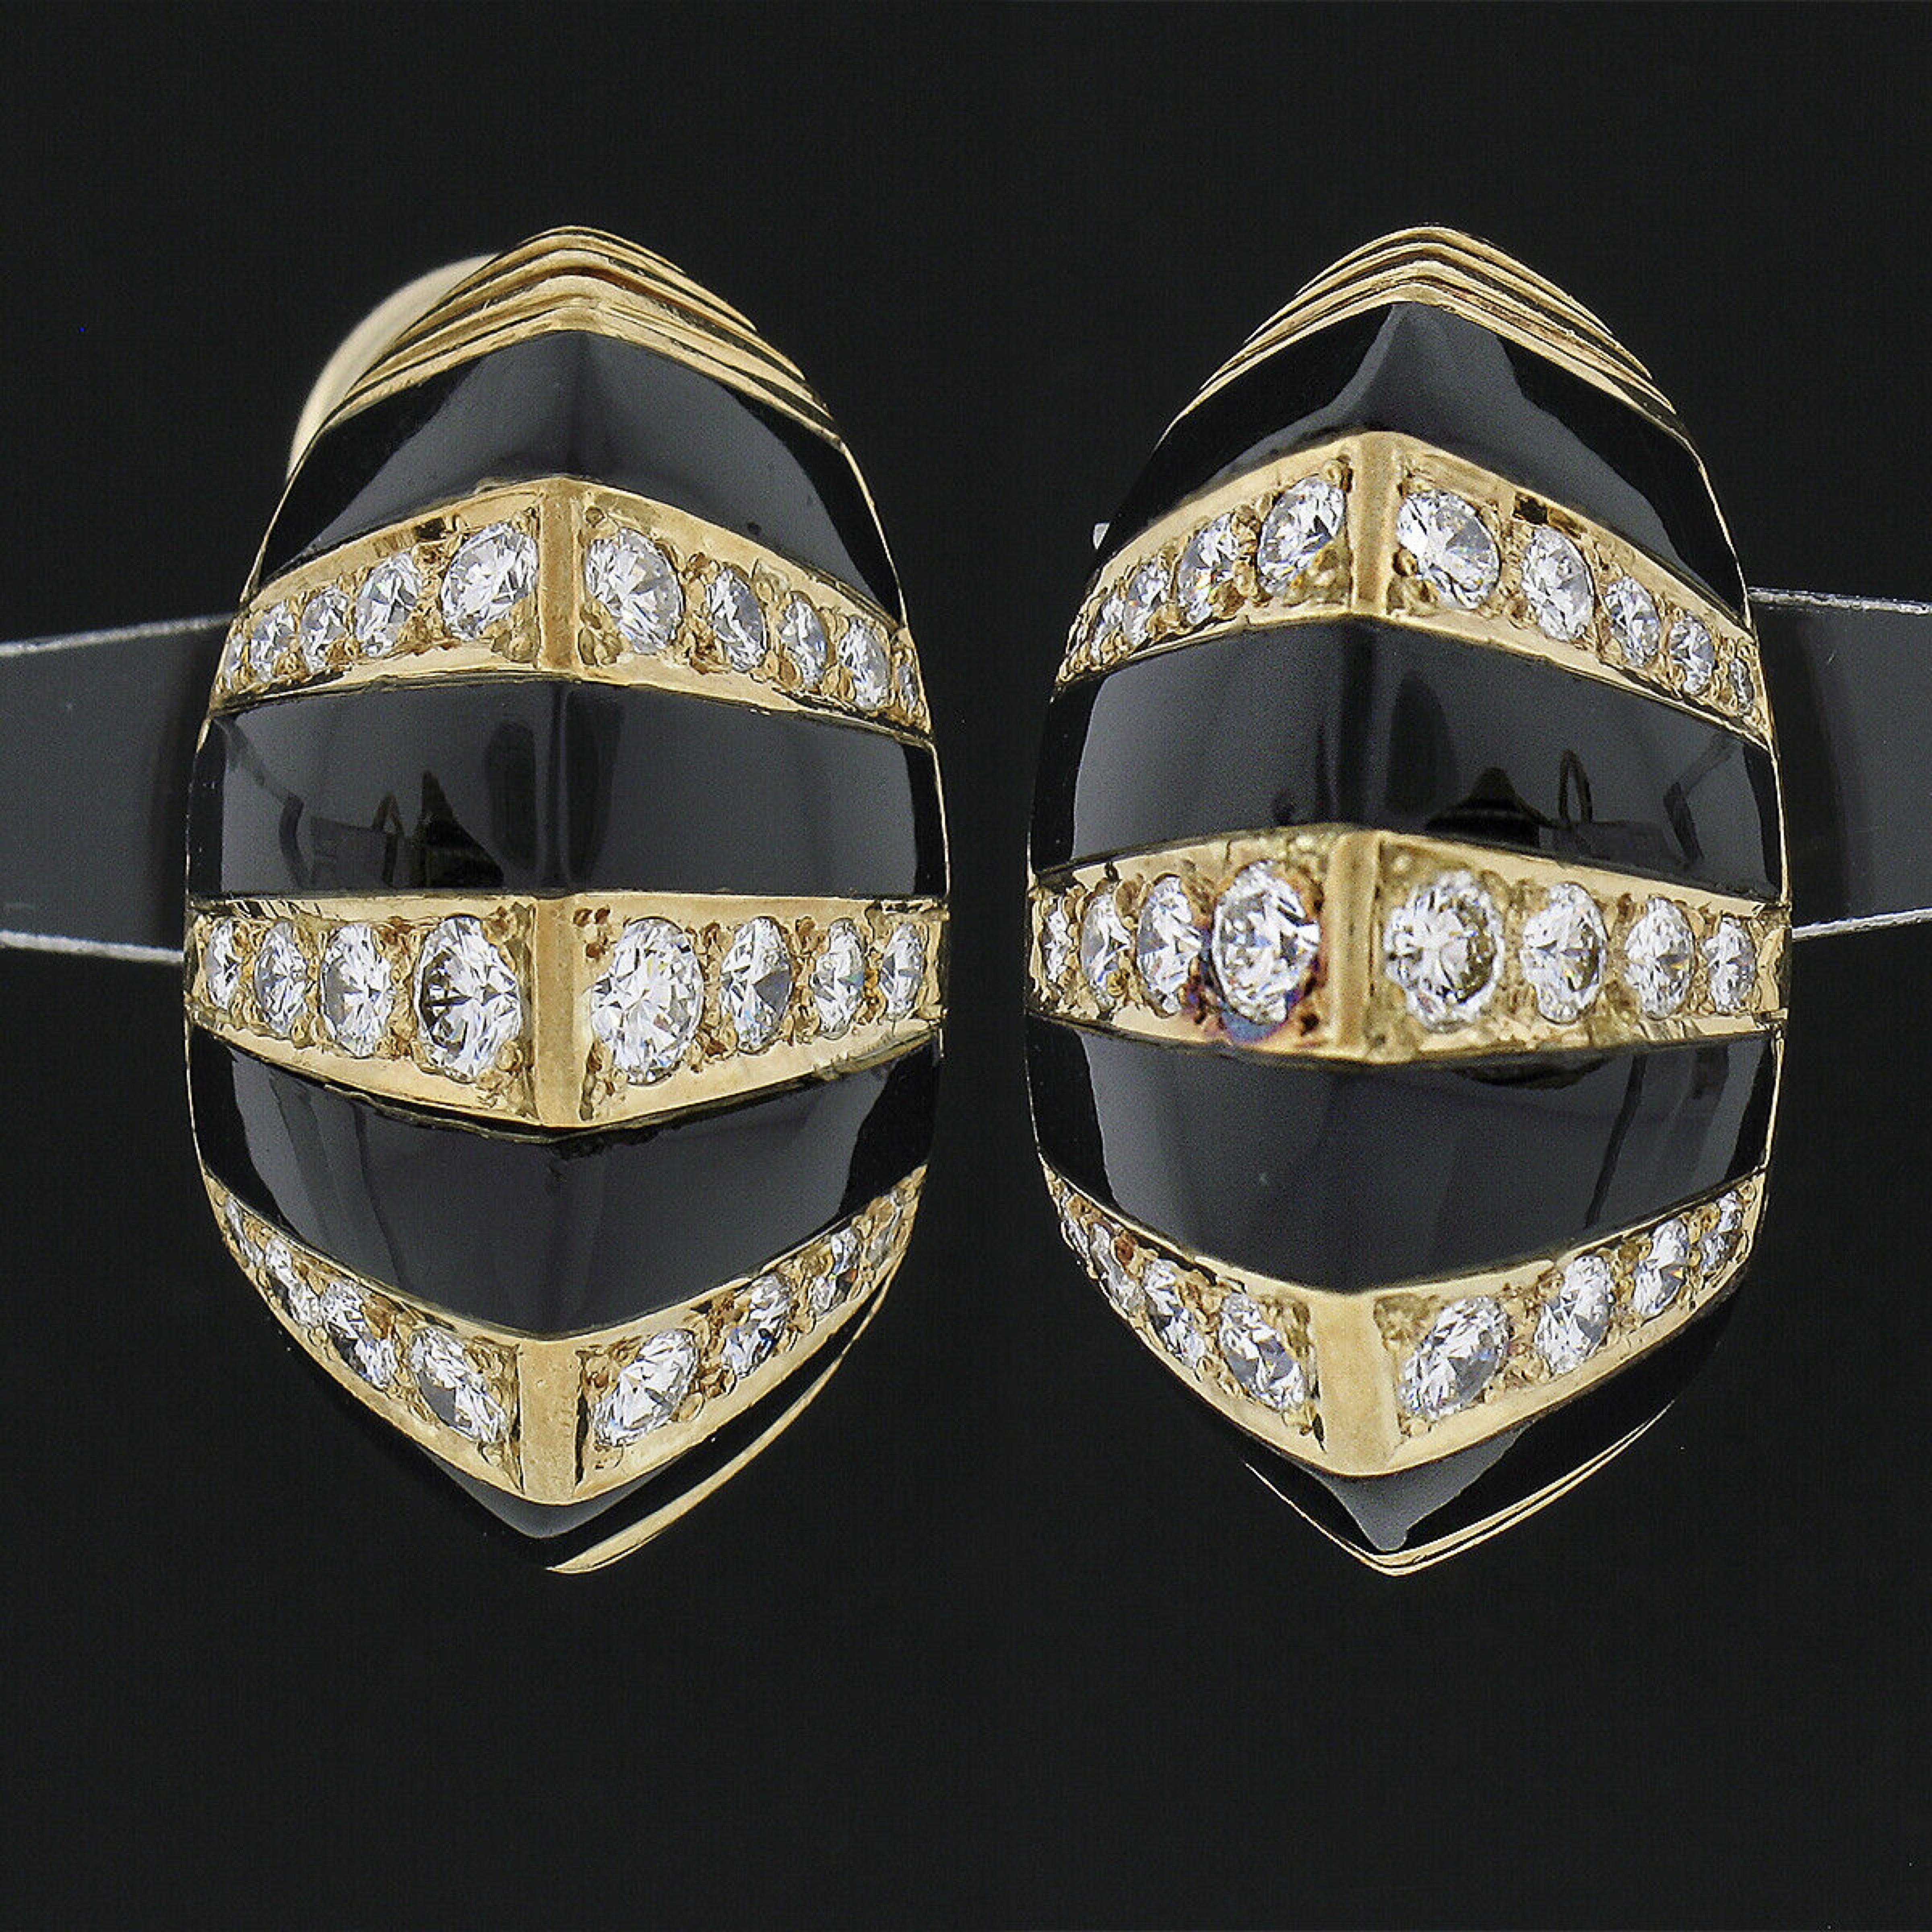 These outstanding vintage earrings are crafted in solid 18k yellow gold and feature a domed button style that alternates with fine black onyx gemstones and diamonds throughout. Their elegant striped design is constructed from custom cut black onyx